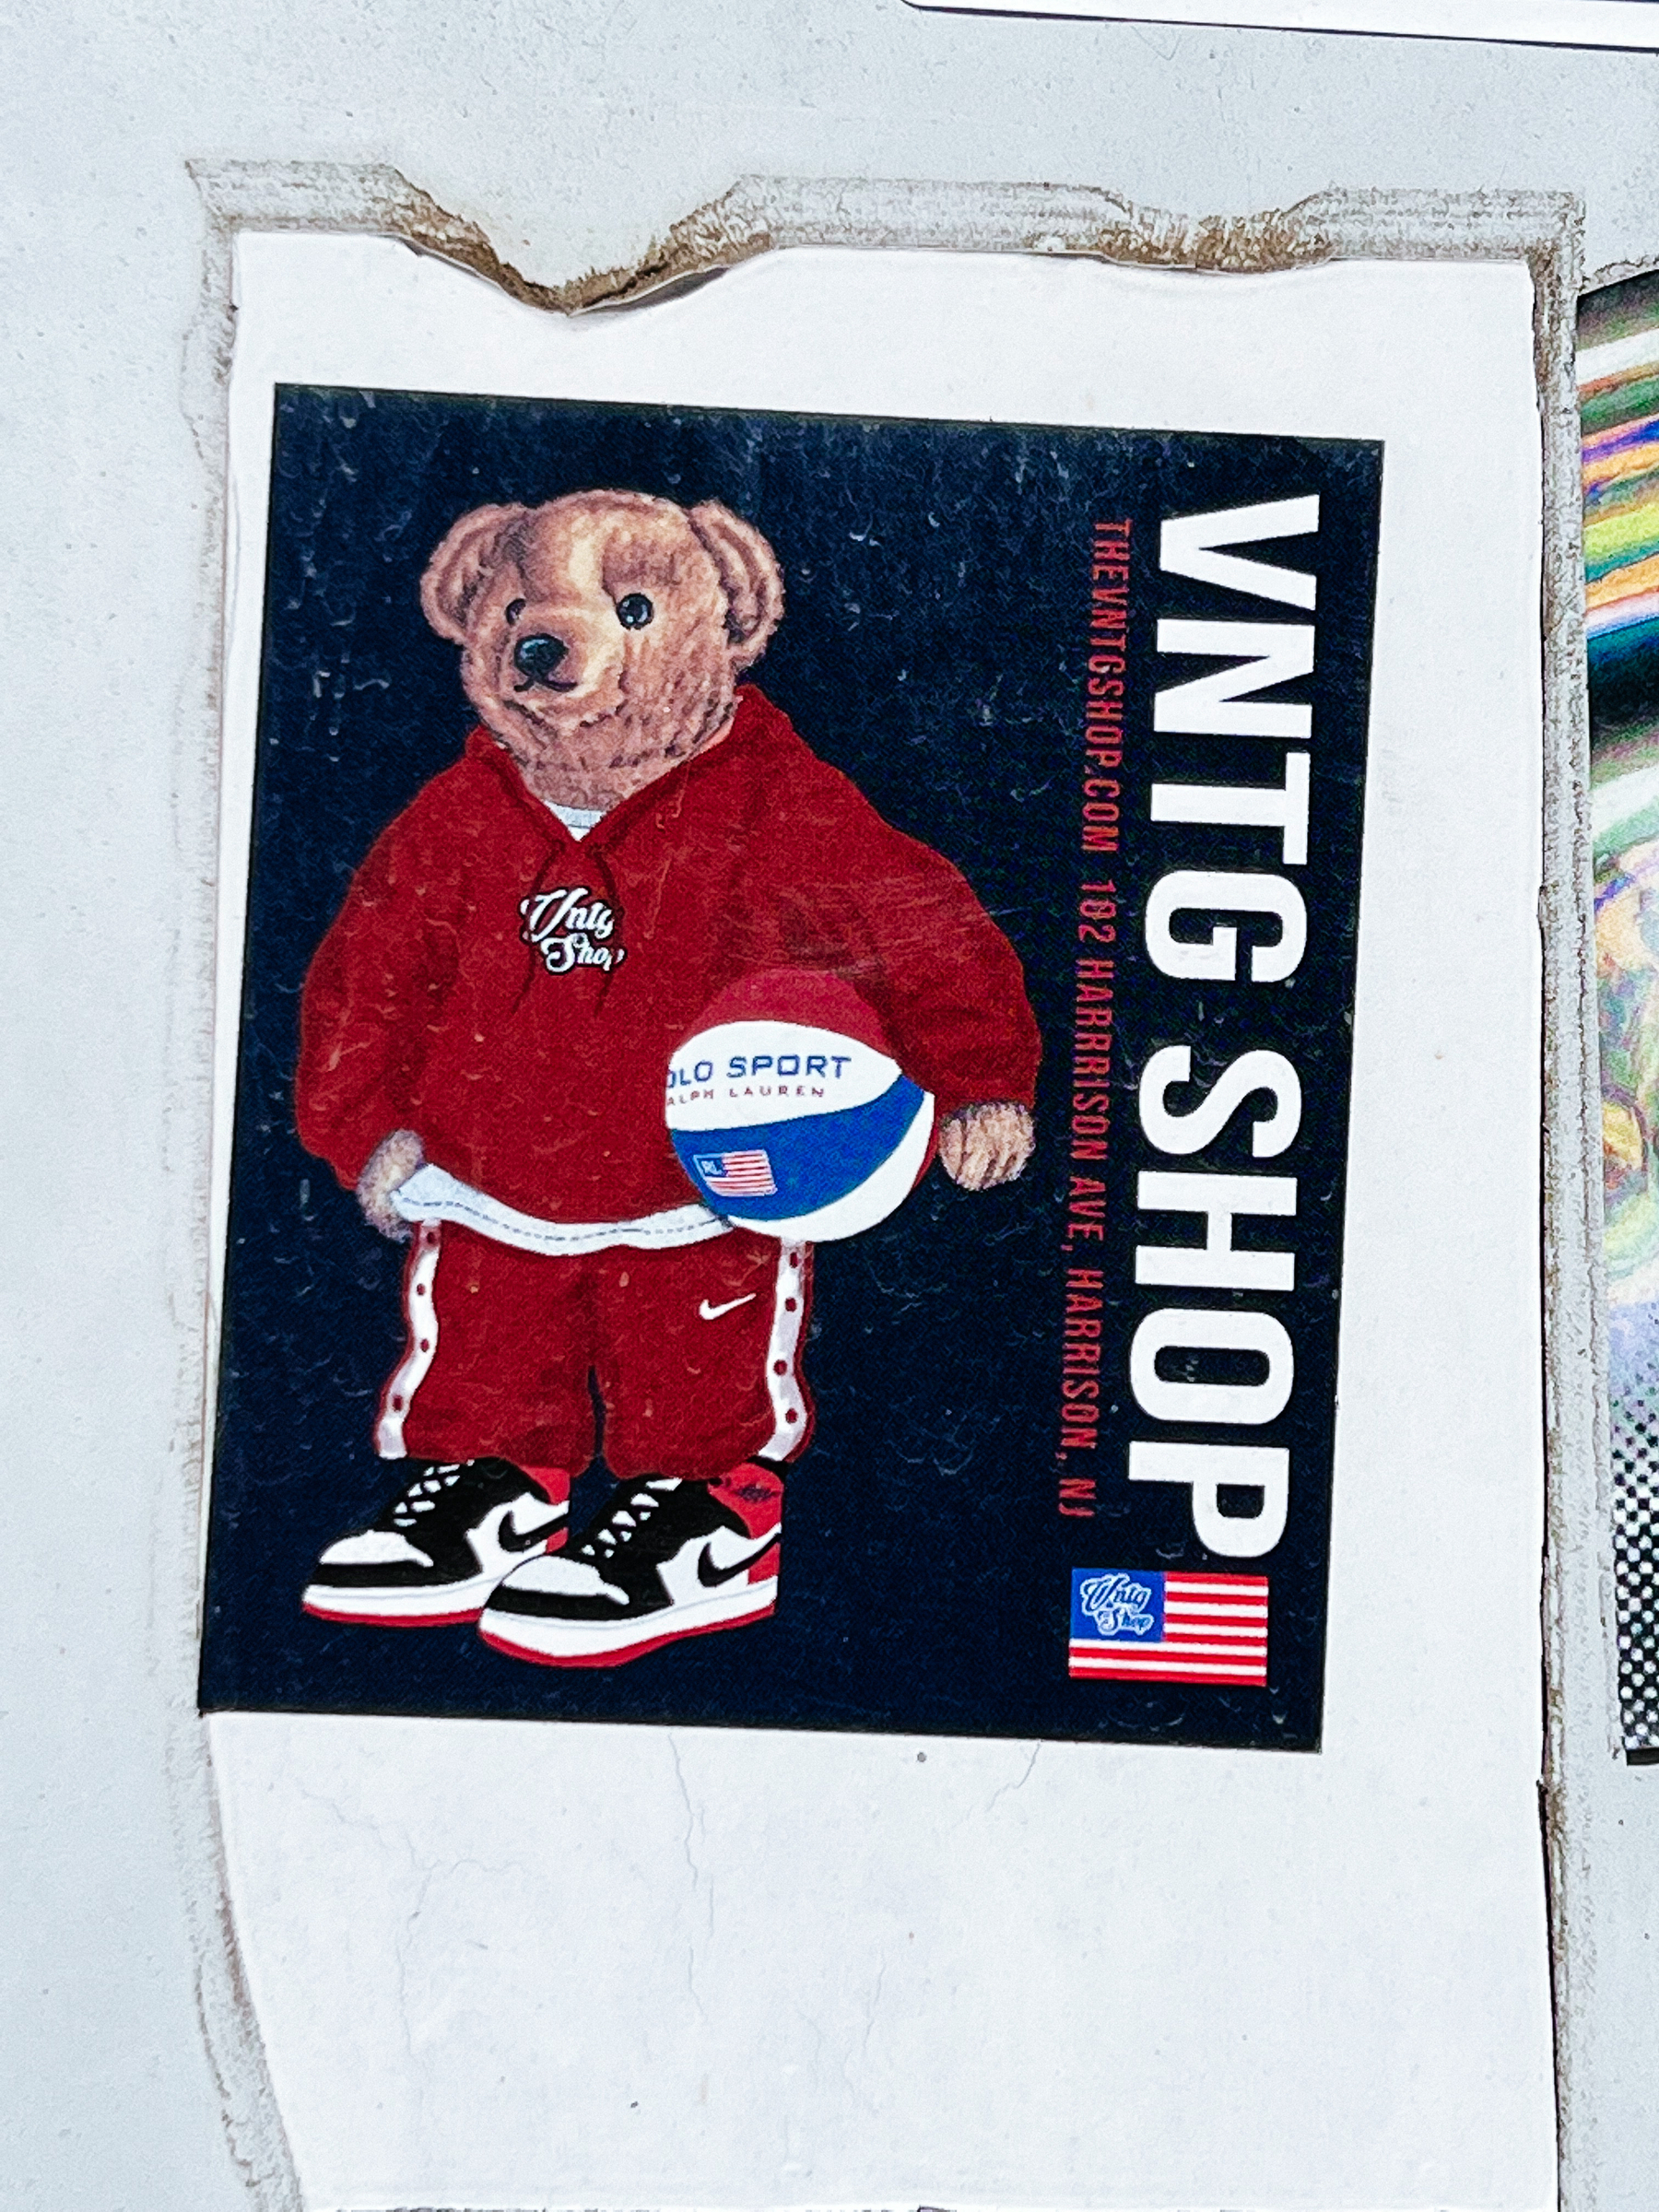 Sticker of a bear in a tracksuit, holding a basket ball. “VNTG SHOP” written on the sticker, with a USA flag. 